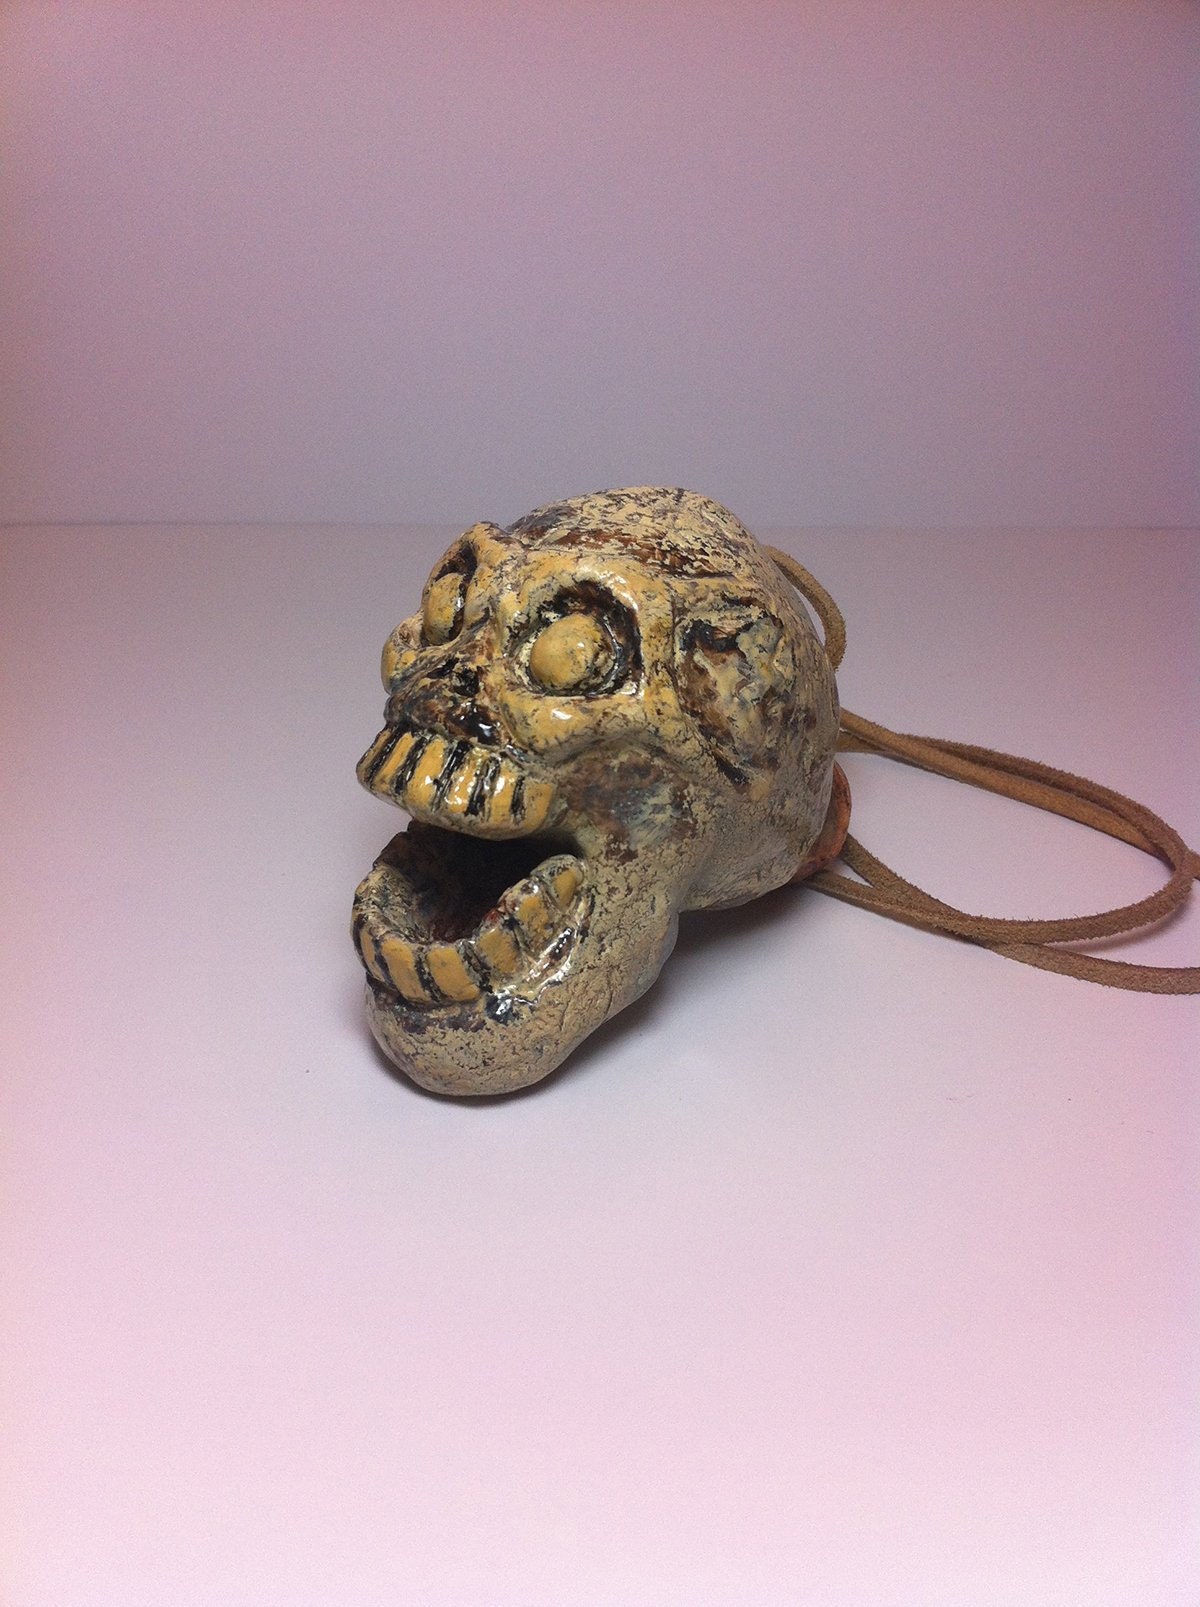 Aztec Death Whistle - Horrific Sounds of Death and Screams This Death Whistle Can Produce